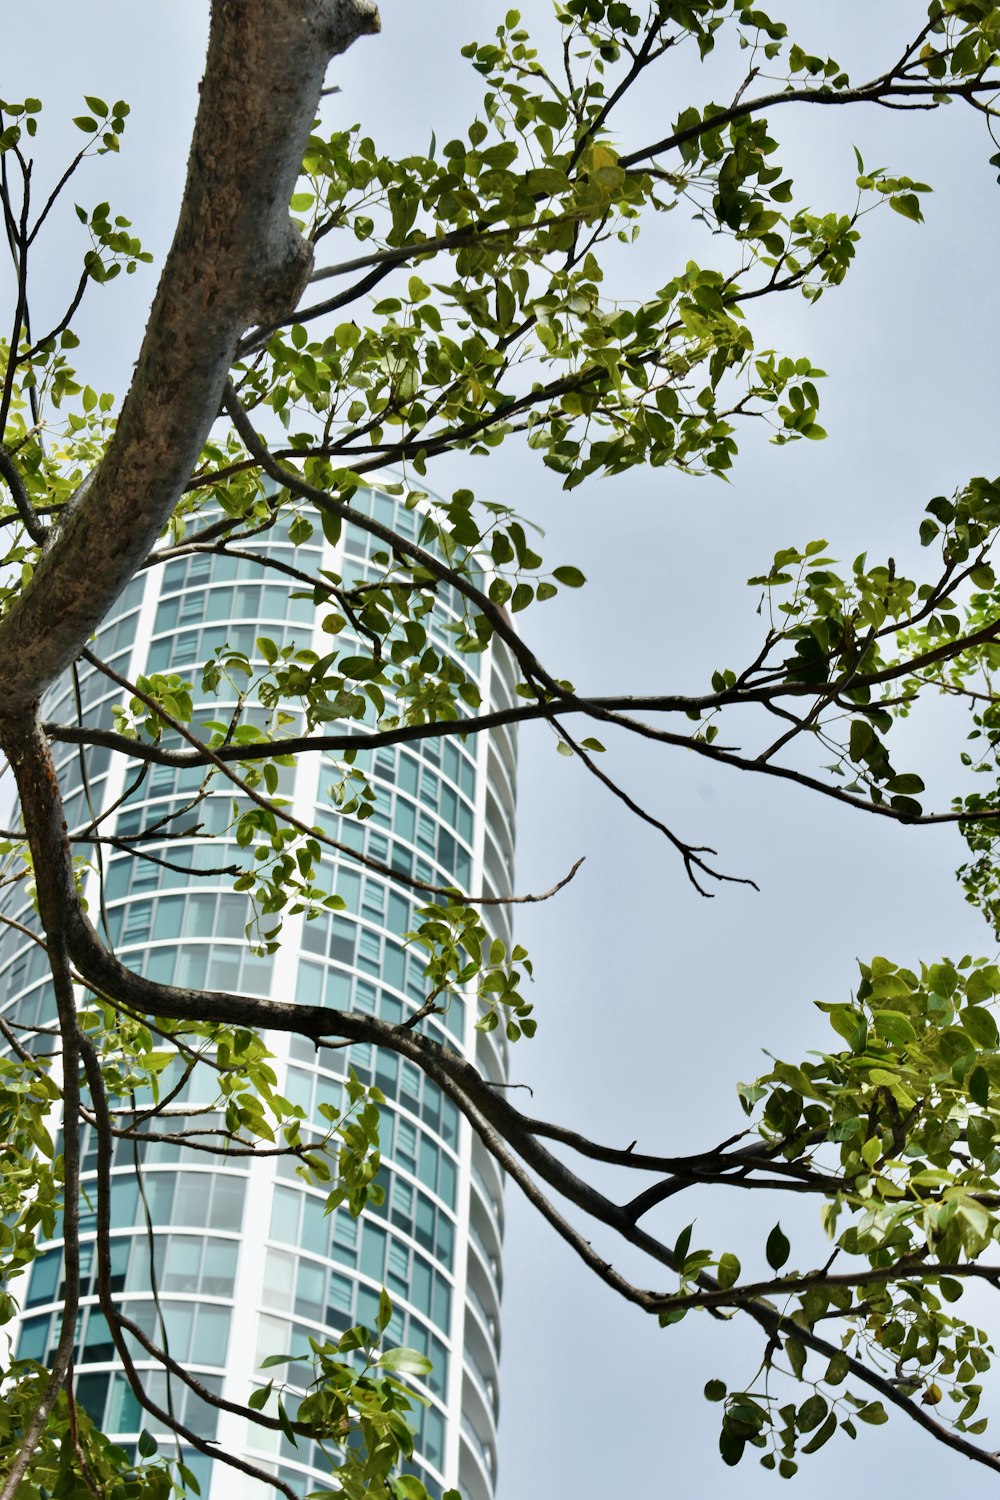 a tall building is seen through the branches of a tree